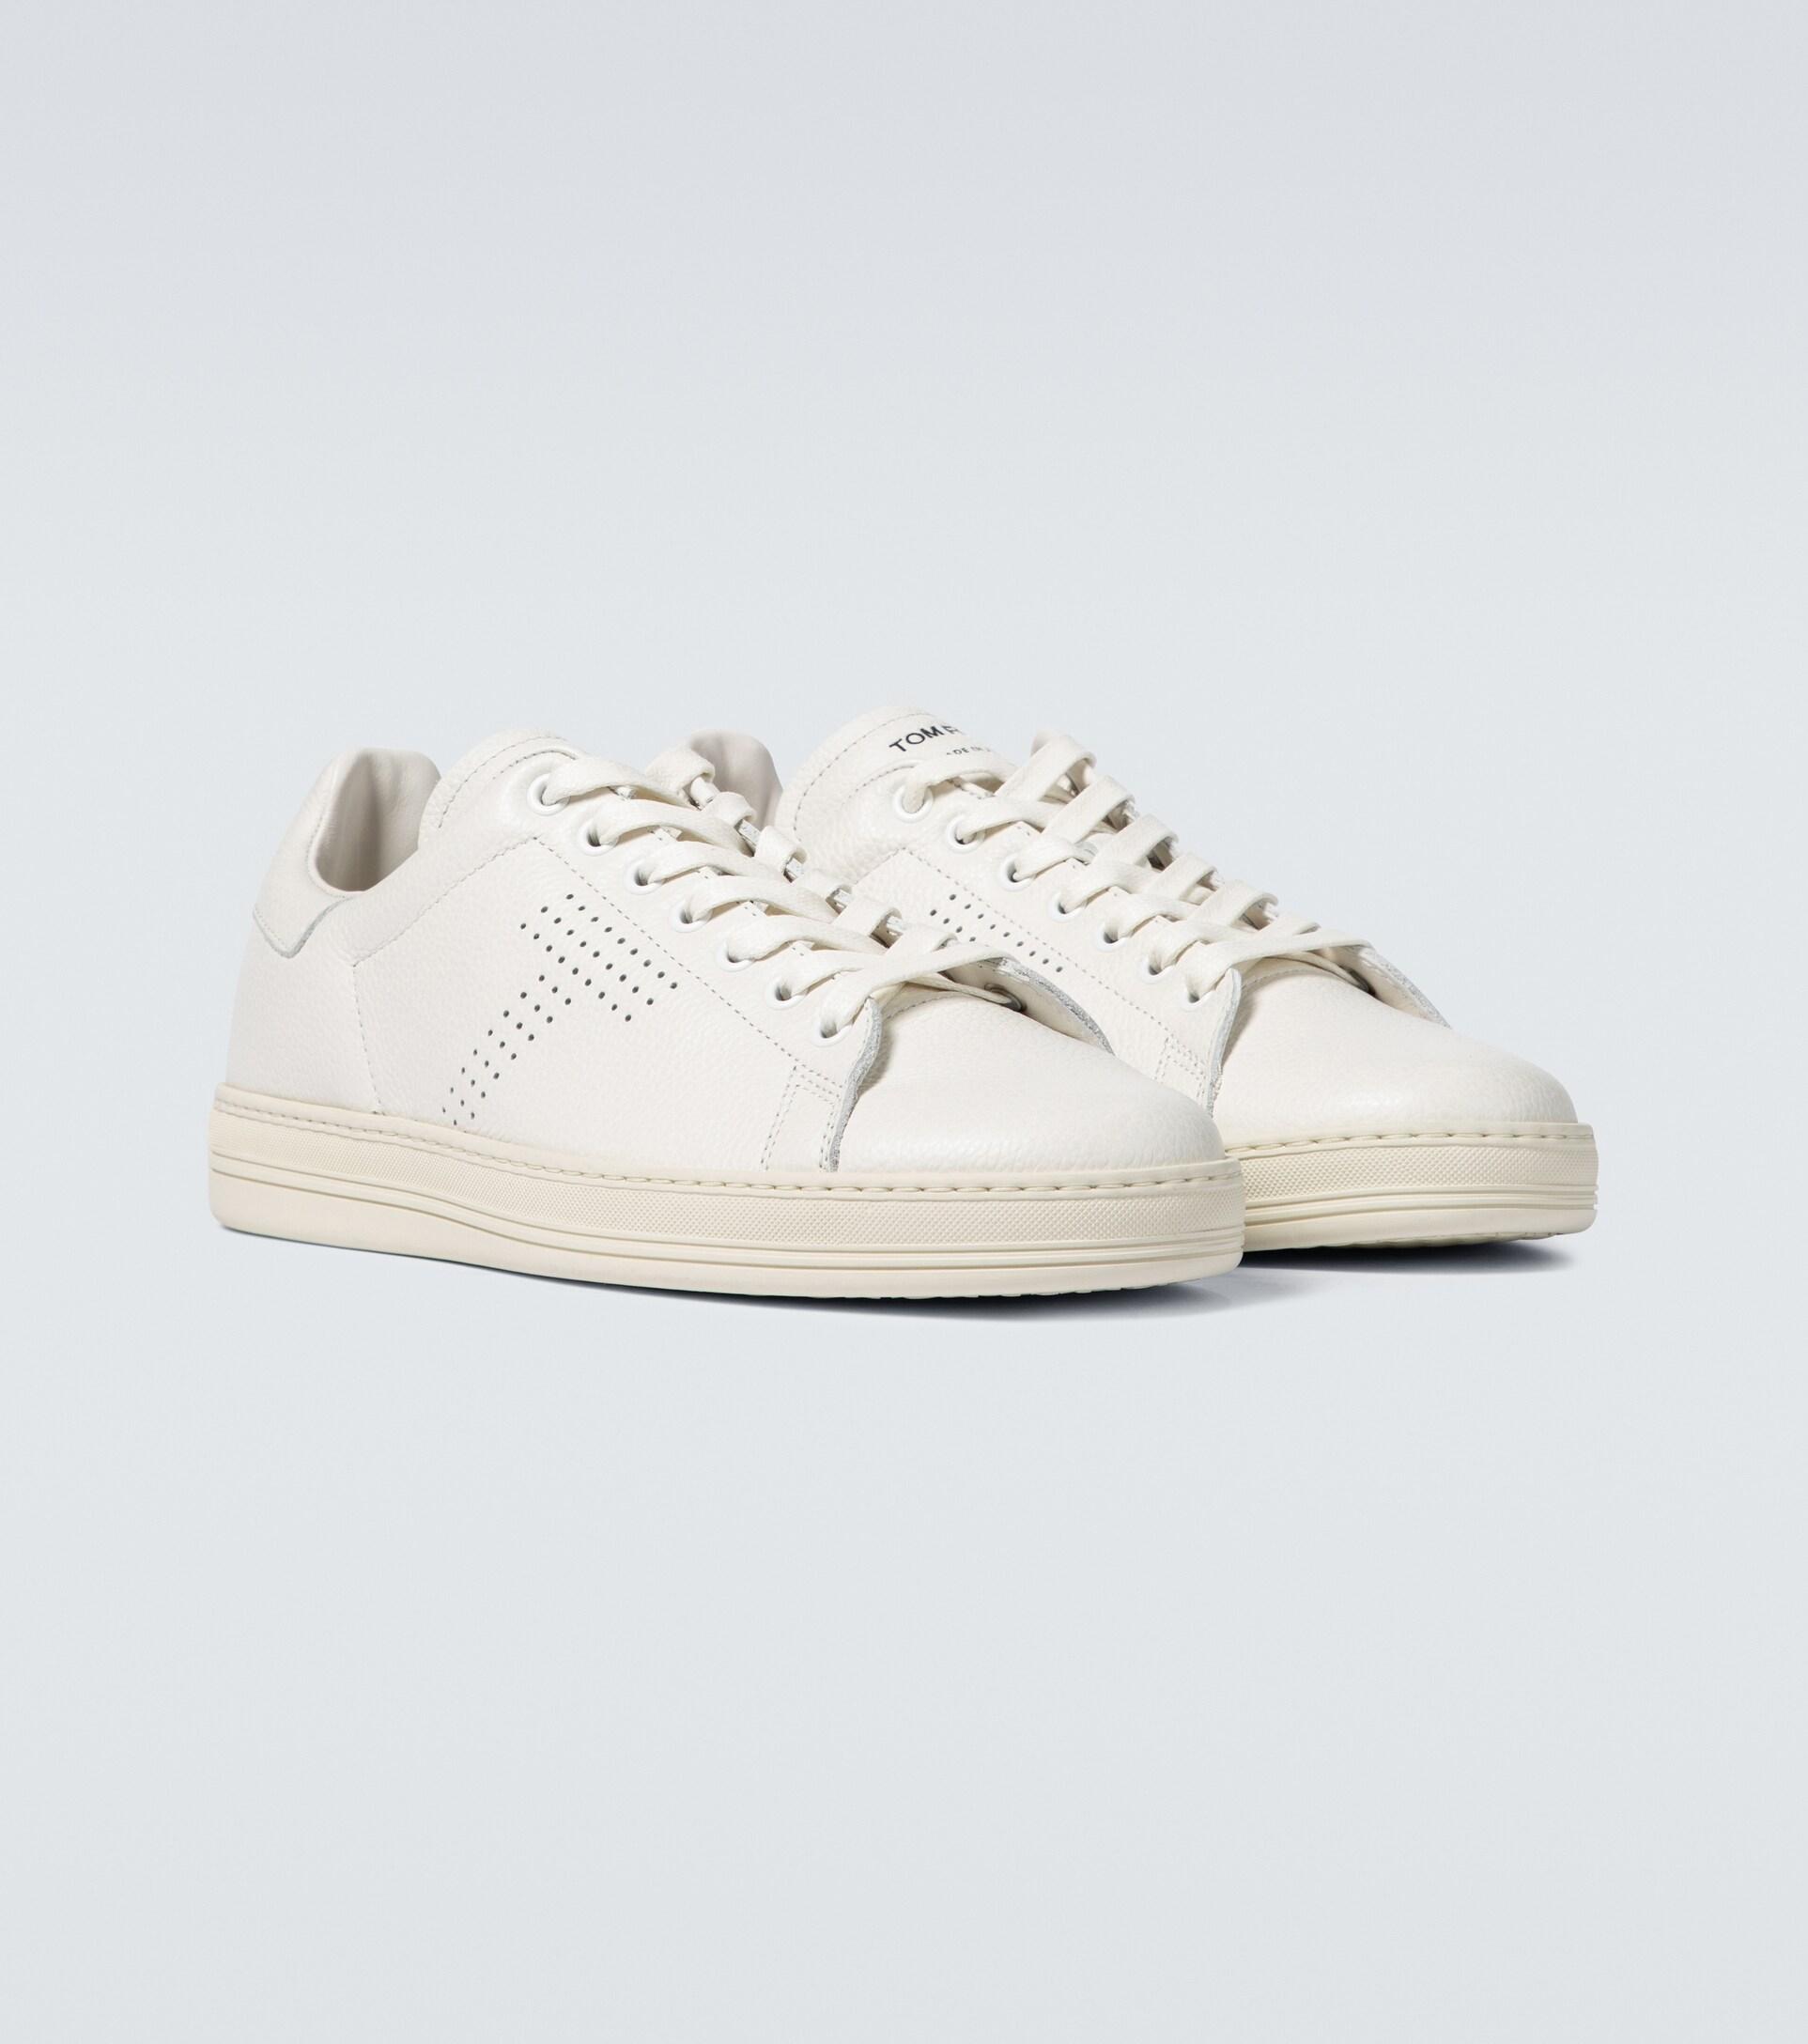 Tom Ford Warwick Grained Leather Sneakers in White for Men | Lyst